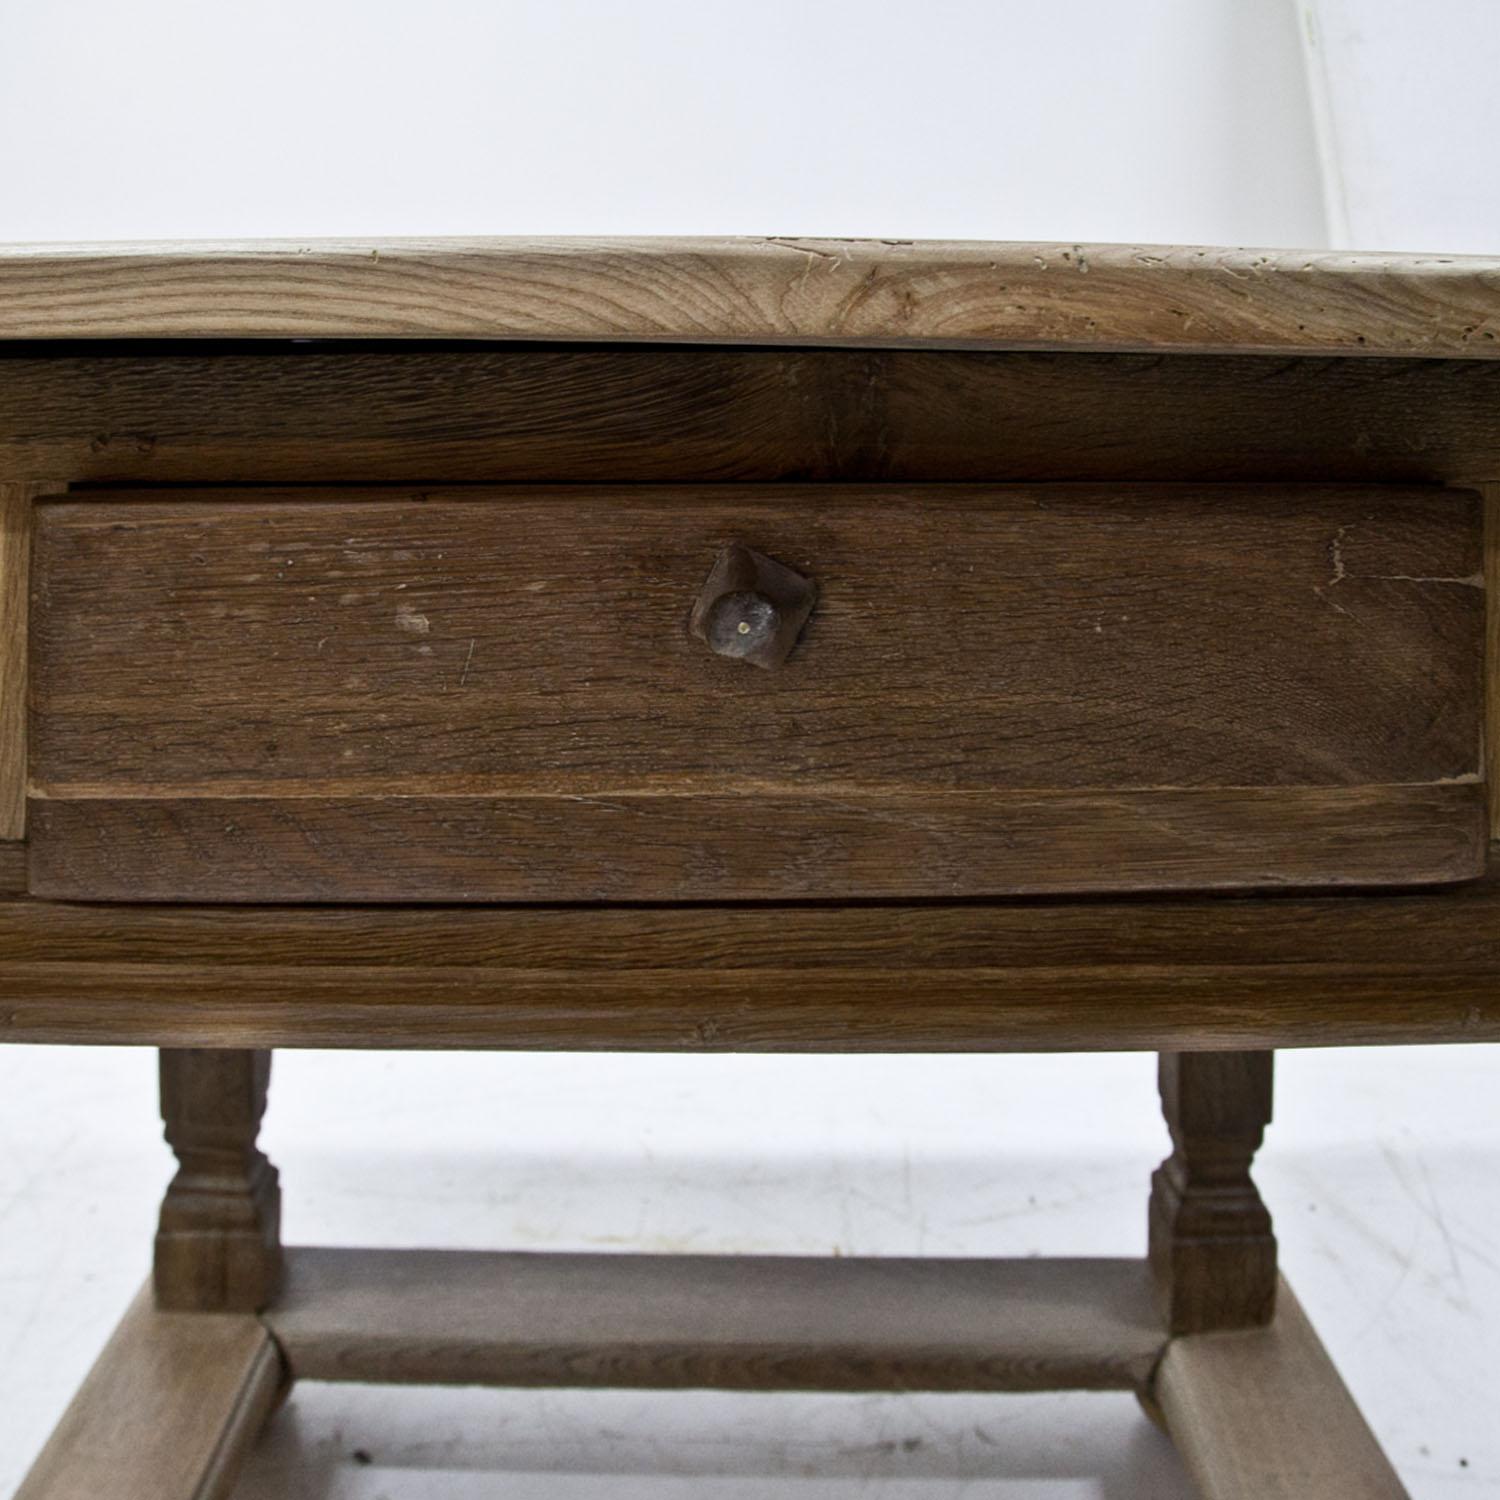 Wood Provincial Table, Franconia, Second Half of the 18th Century